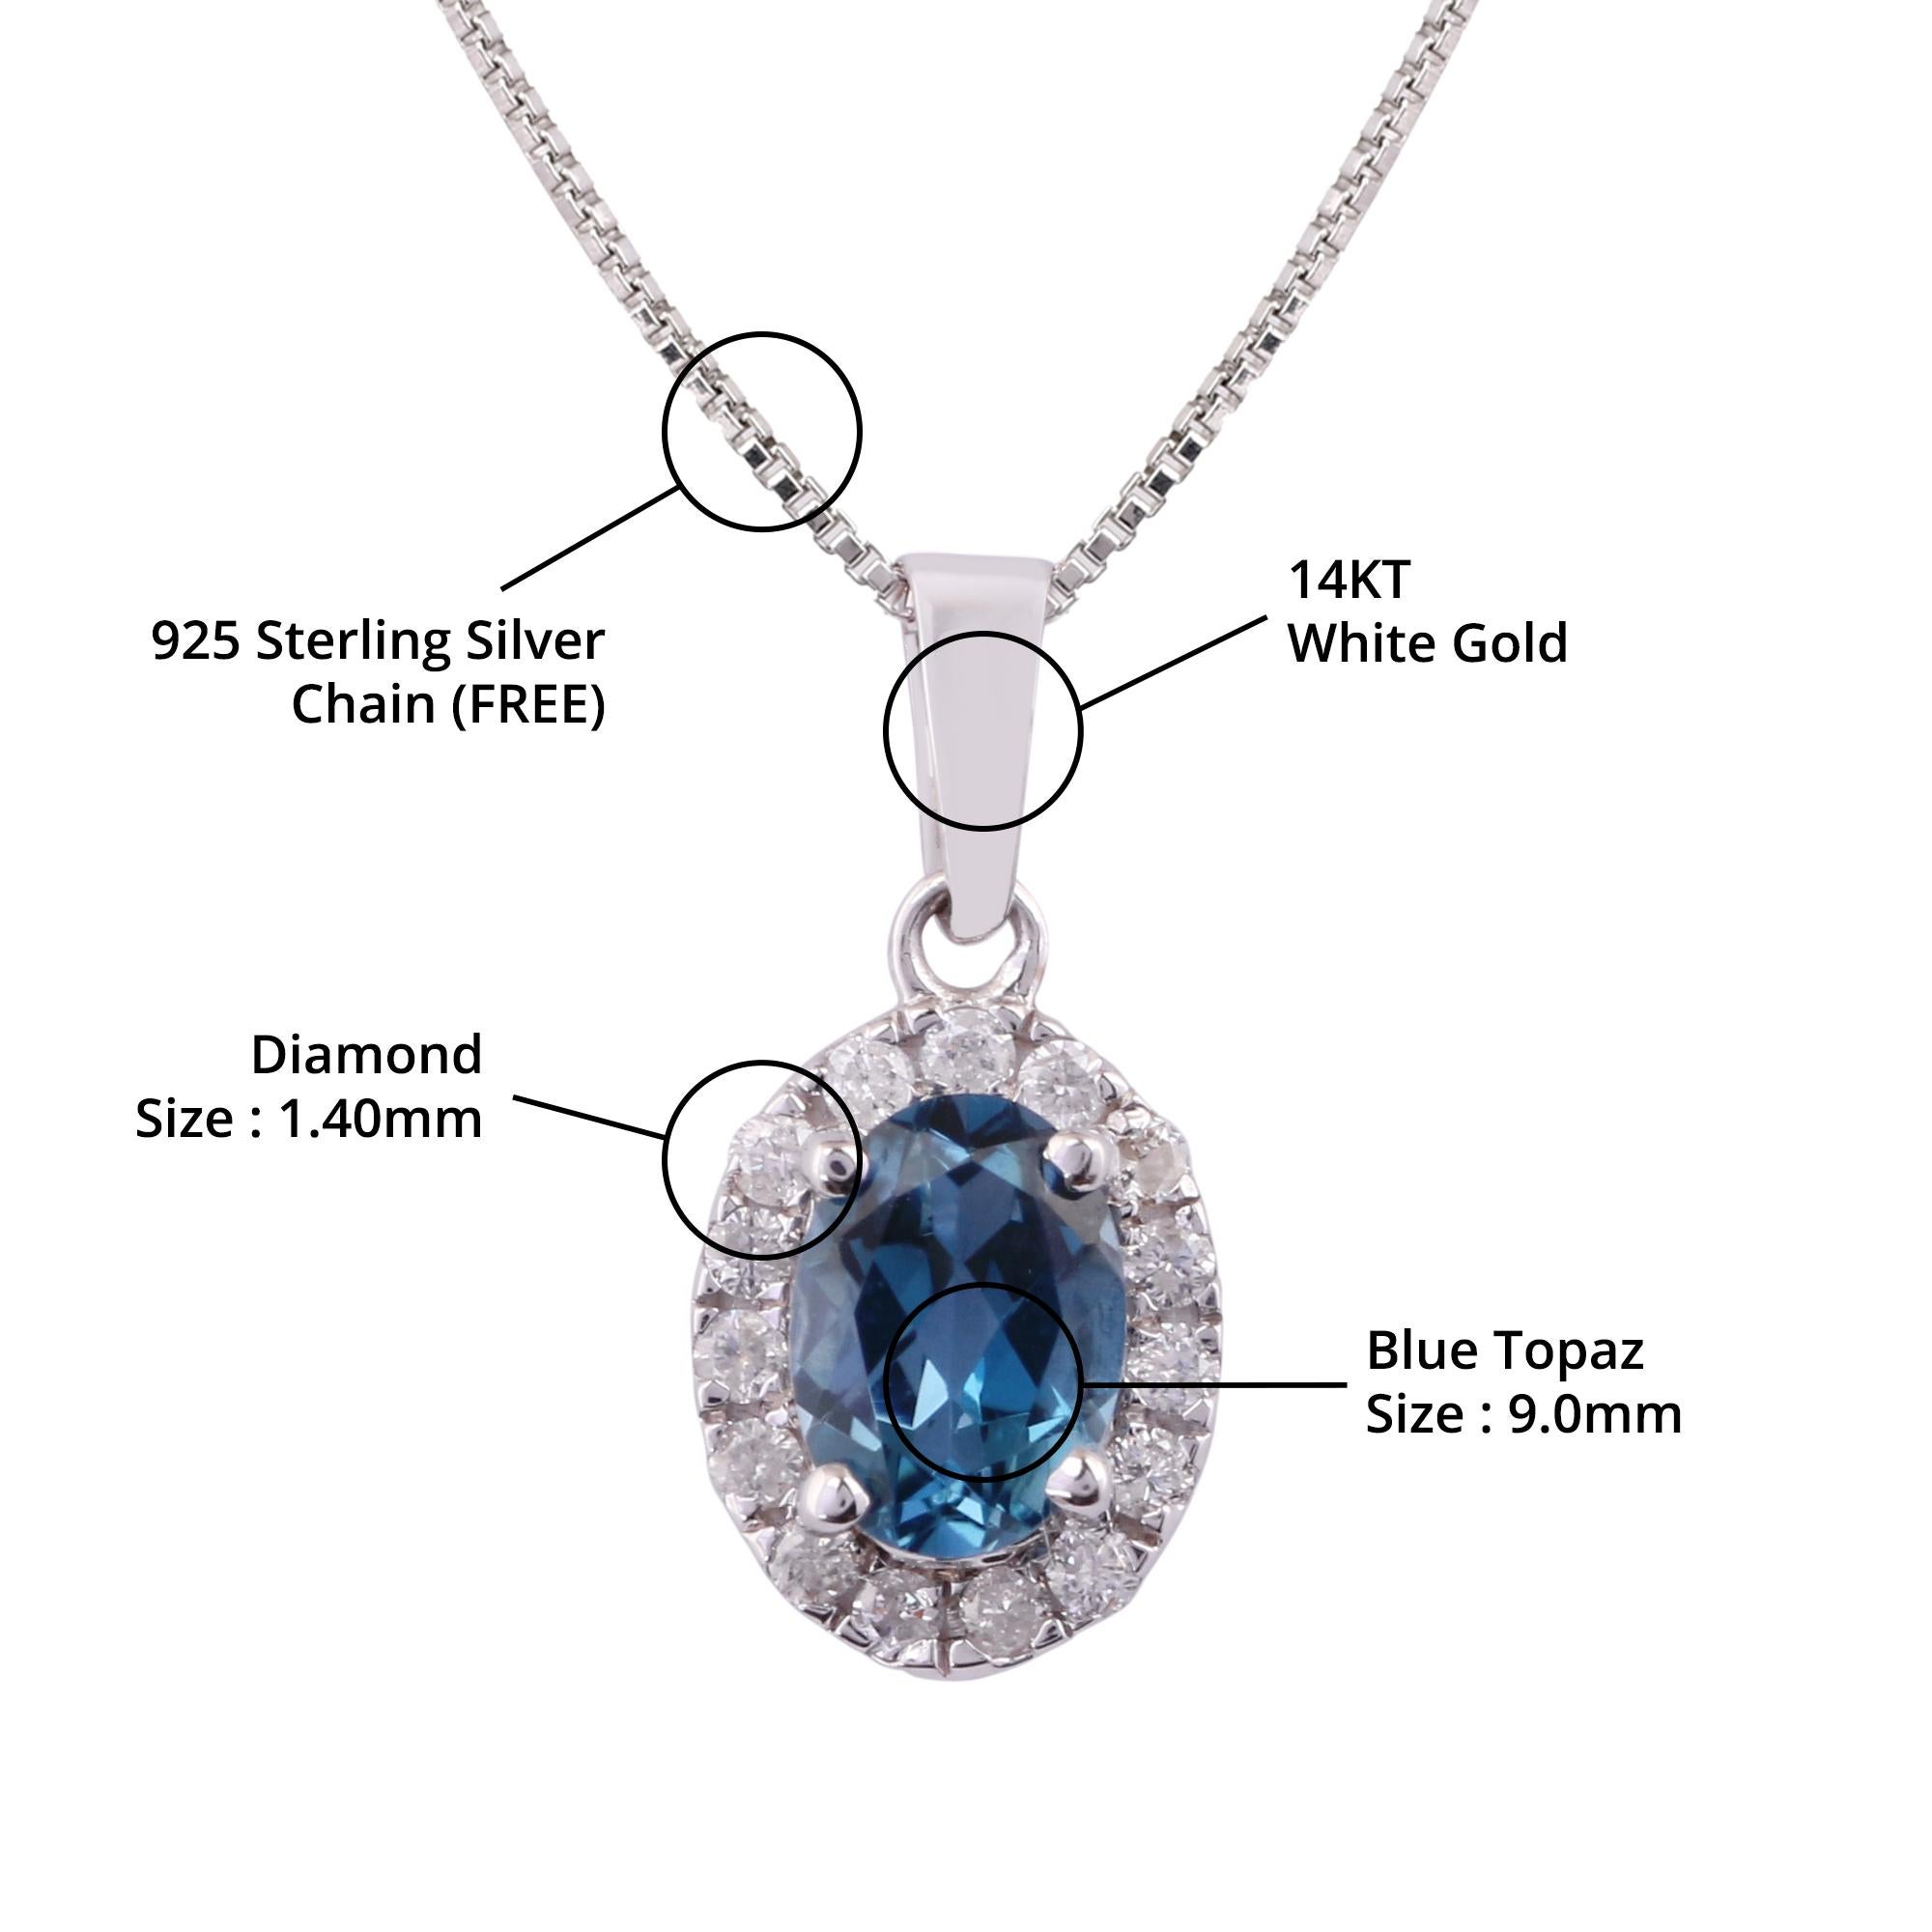 Item details:-

✦ SKU:- JPD00158WWW

✦ Material :- Gold

✦ Metal Purity : 14K White Gold

✦ Gemstone Specification:- 
✧ Clear Diamond Round (l1/H1) - 1.40mm - 15 Pcs
✧ Natural Blue Topaz - 9mm - 1 Pcs


✦ Approx. Diamond Carat Weight : 0.182Carat
✦